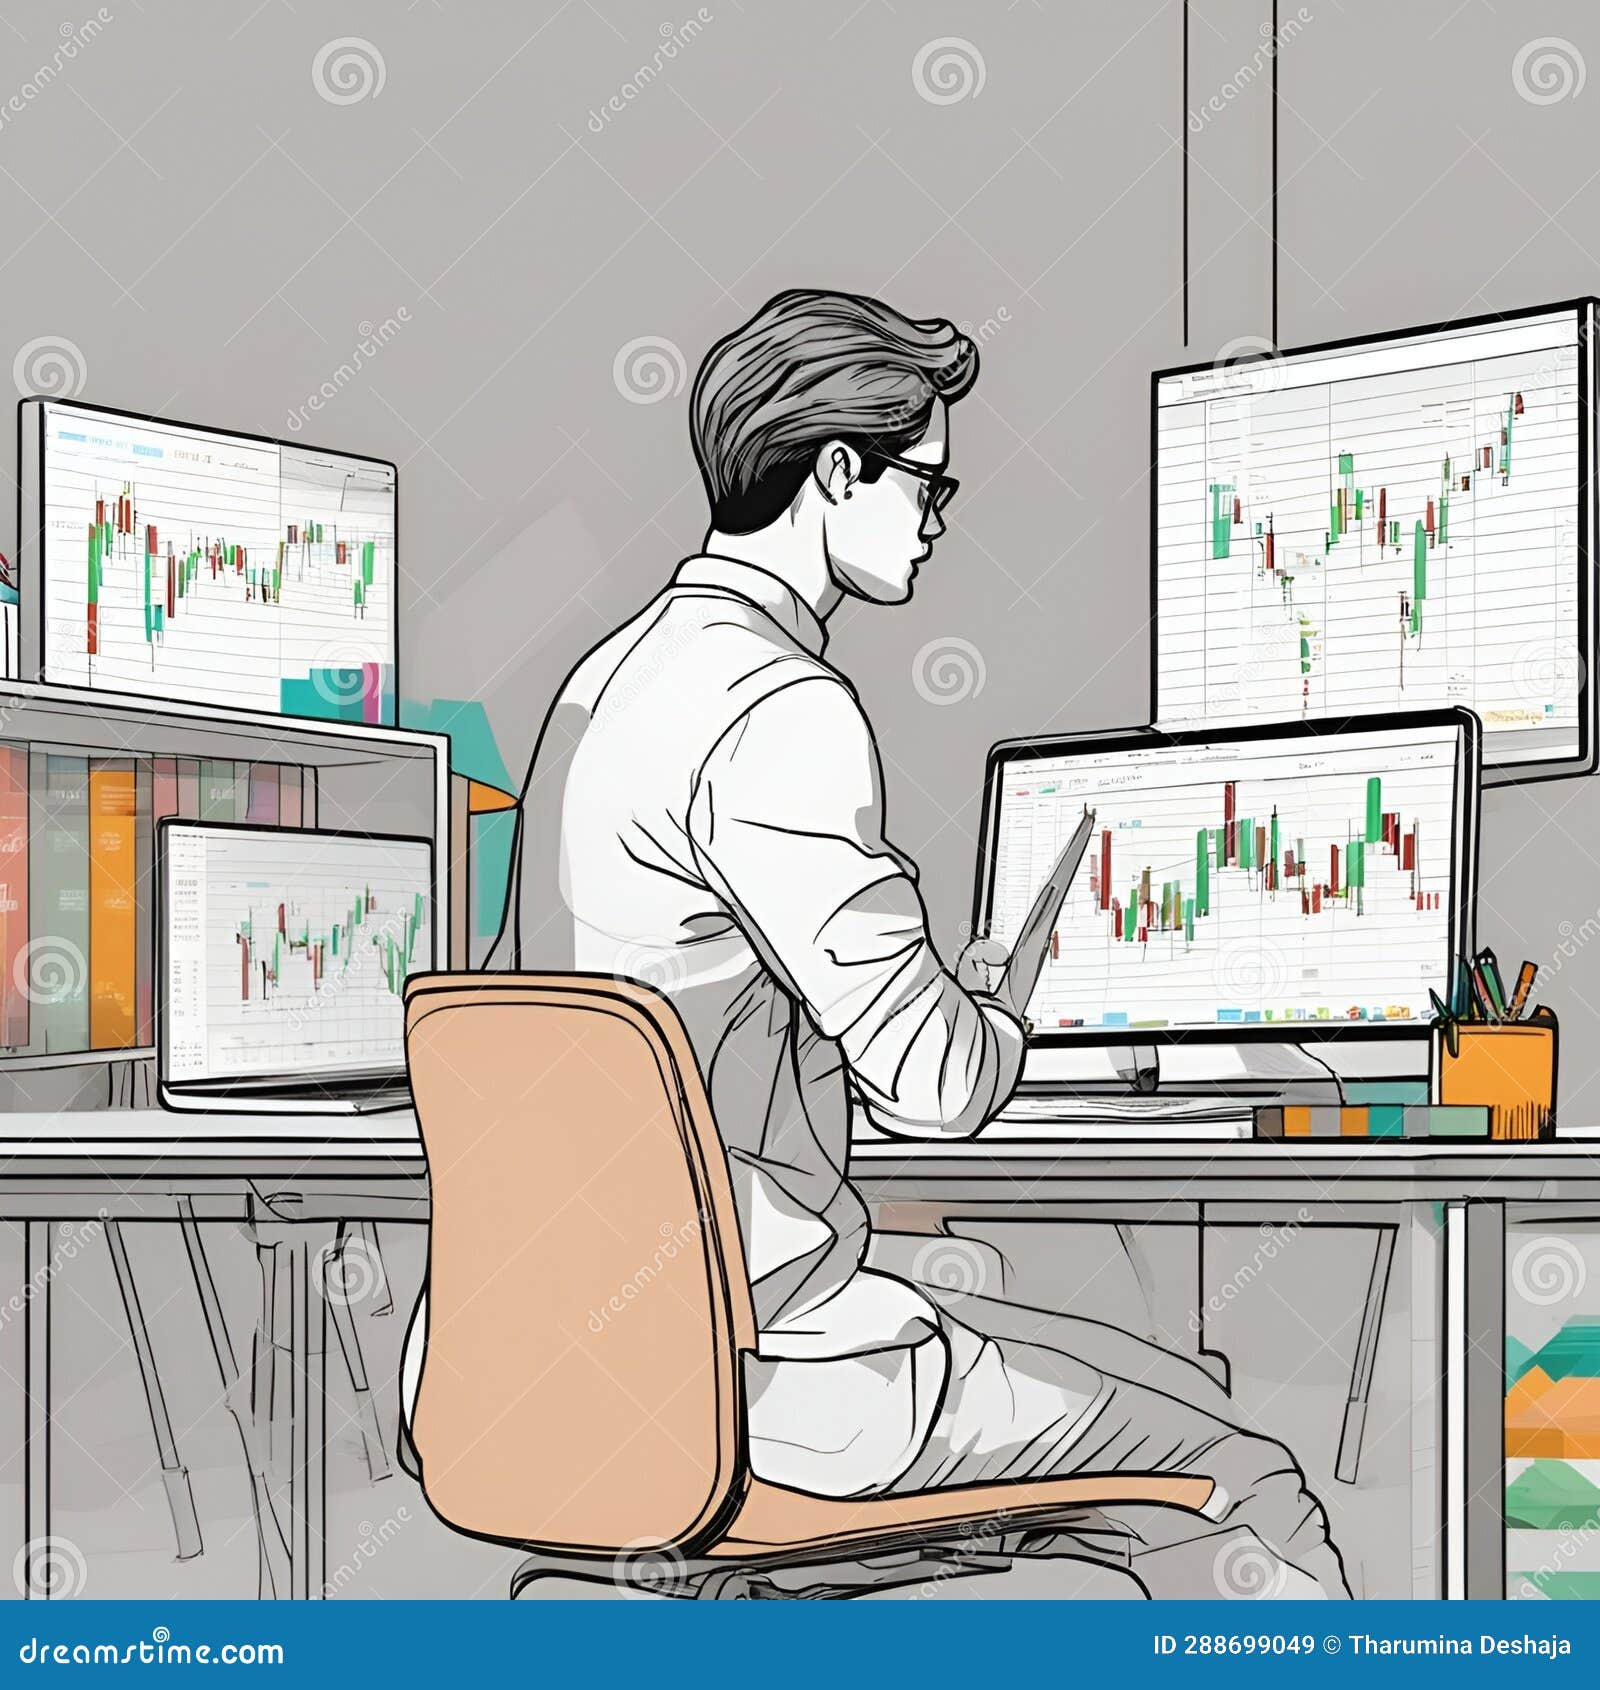 digital trading journey: exploring cryptocurrency candlesticks on the laptop